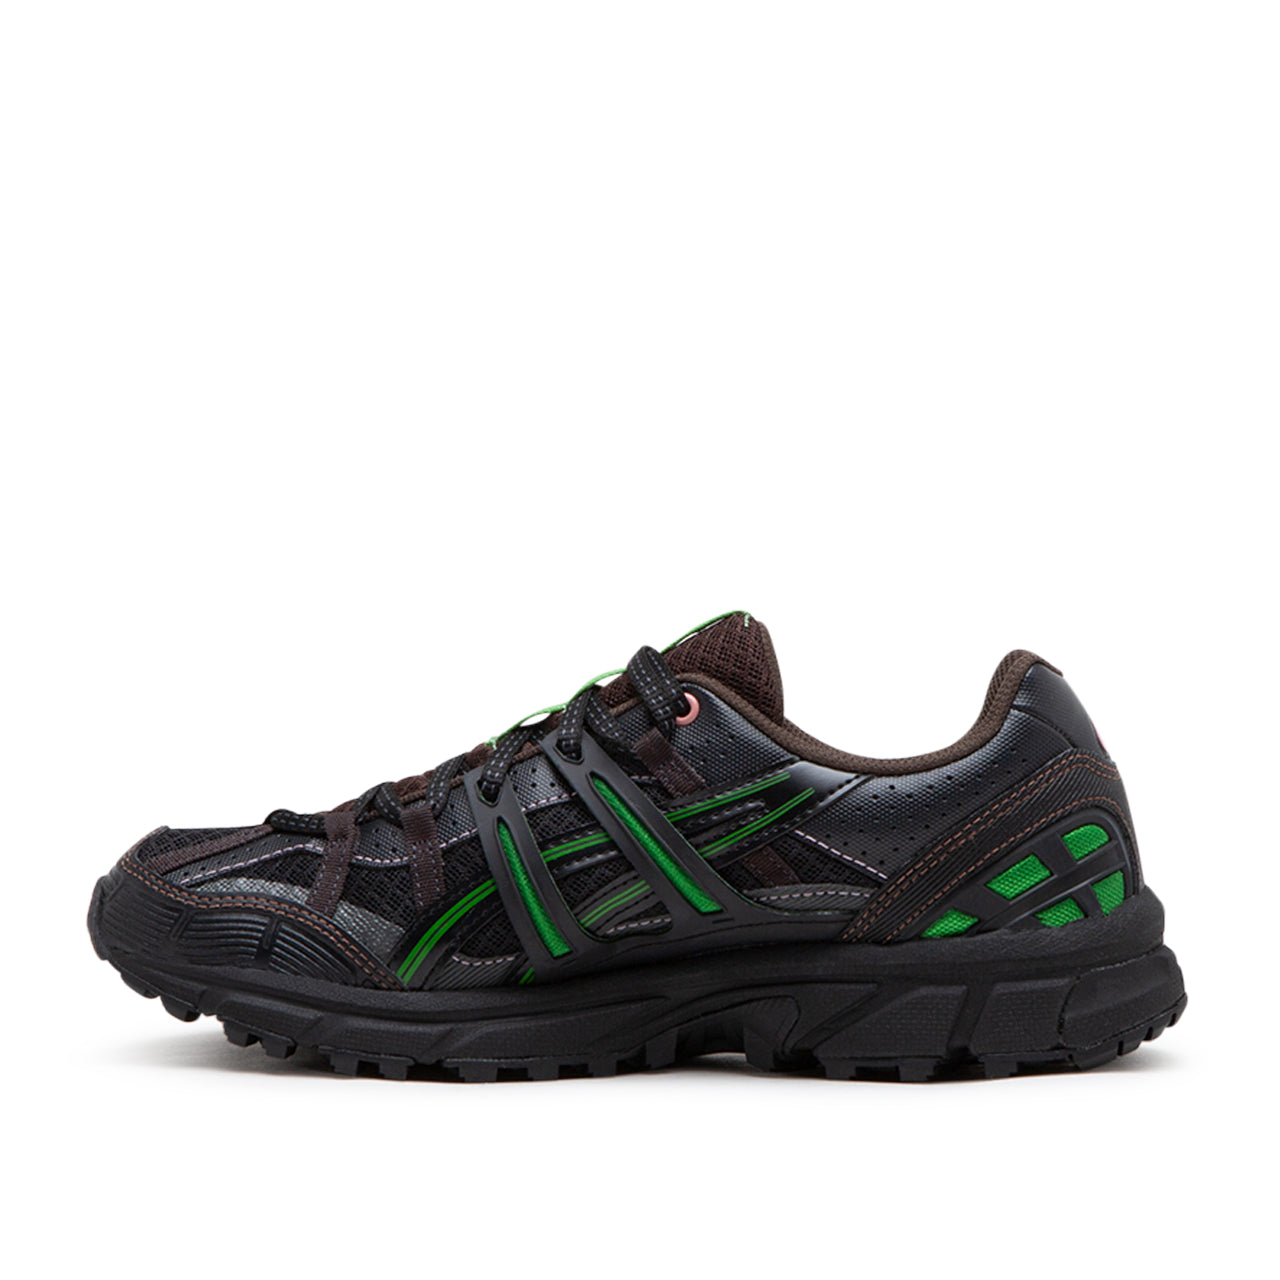 Asics x Andersson Bell Gel-Sonoma 15-50 (Black) 1201A852-001 - Allike Store